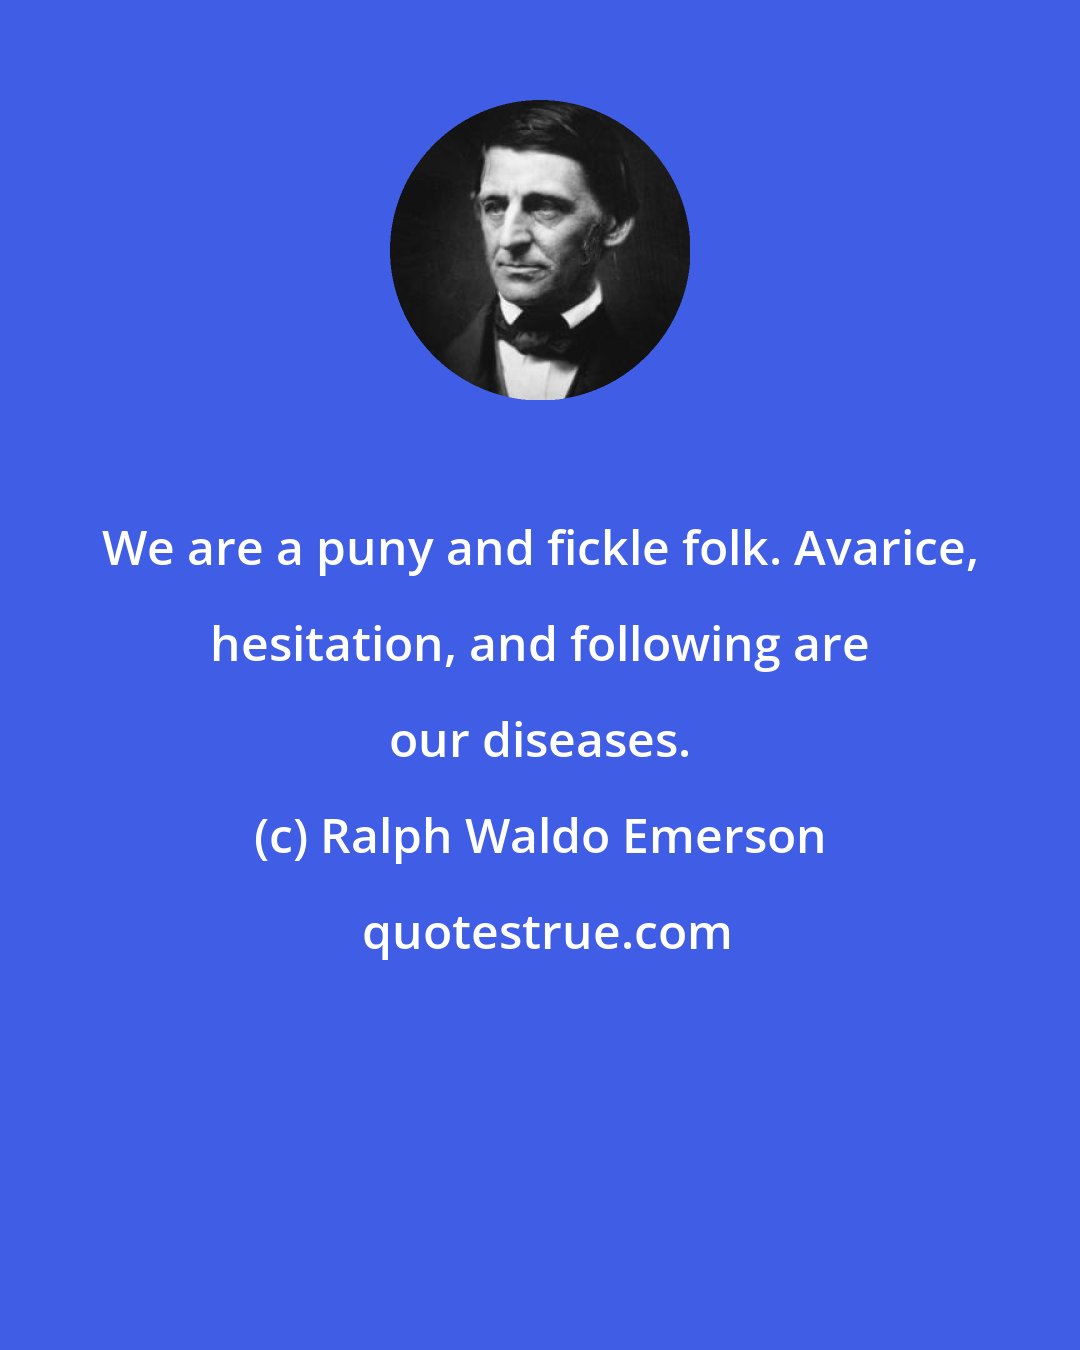 Ralph Waldo Emerson: We are a puny and fickle folk. Avarice, hesitation, and following are our diseases.